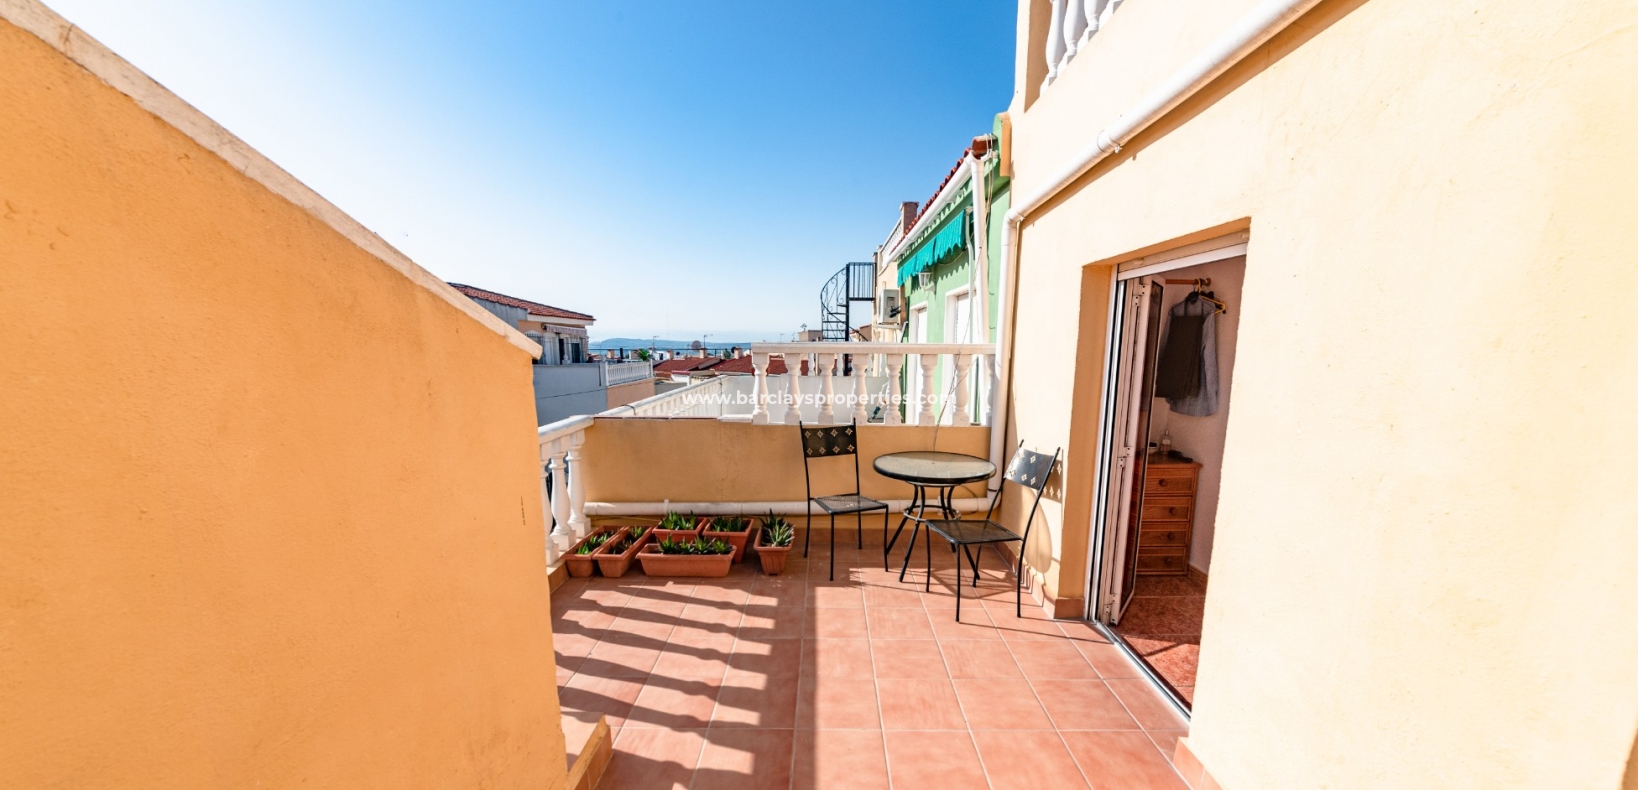 Terrace - Property for sale in La Marina Spain with Sea views